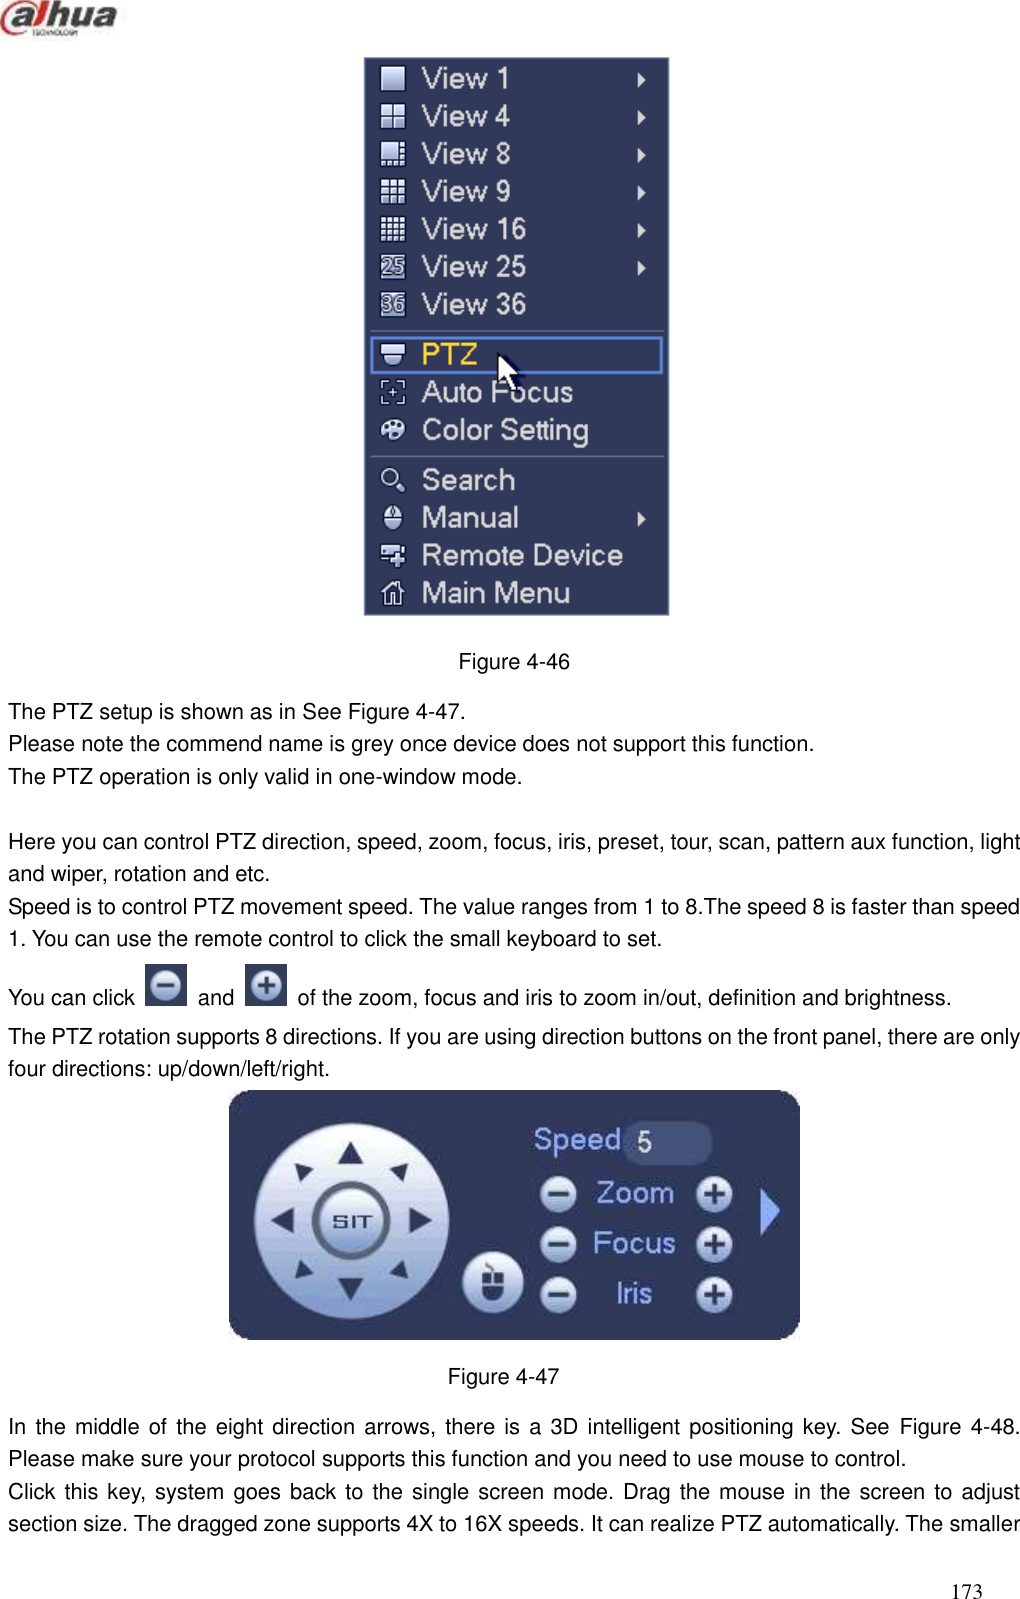  173   Figure 4-46 The PTZ setup is shown as in See Figure 4-47.   Please note the commend name is grey once device does not support this function. The PTZ operation is only valid in one-window mode.    Here you can control PTZ direction, speed, zoom, focus, iris, preset, tour, scan, pattern aux function, light and wiper, rotation and etc.   Speed is to control PTZ movement speed. The value ranges from 1 to 8.The speed 8 is faster than speed 1. You can use the remote control to click the small keyboard to set.   You can click    and    of the zoom, focus and iris to zoom in/out, definition and brightness.     The PTZ rotation supports 8 directions. If you are using direction buttons on the front panel, there are only four directions: up/down/left/right.  Figure 4-47 In the middle of the eight direction arrows, there is a 3D intelligent positioning key. See  Figure 4-48. Please make sure your protocol supports this function and you need to use mouse to control. Click this key, system goes back to the single screen mode. Drag the mouse in the screen to adjust section size. The dragged zone supports 4X to 16X speeds. It can realize PTZ automatically. The smaller 